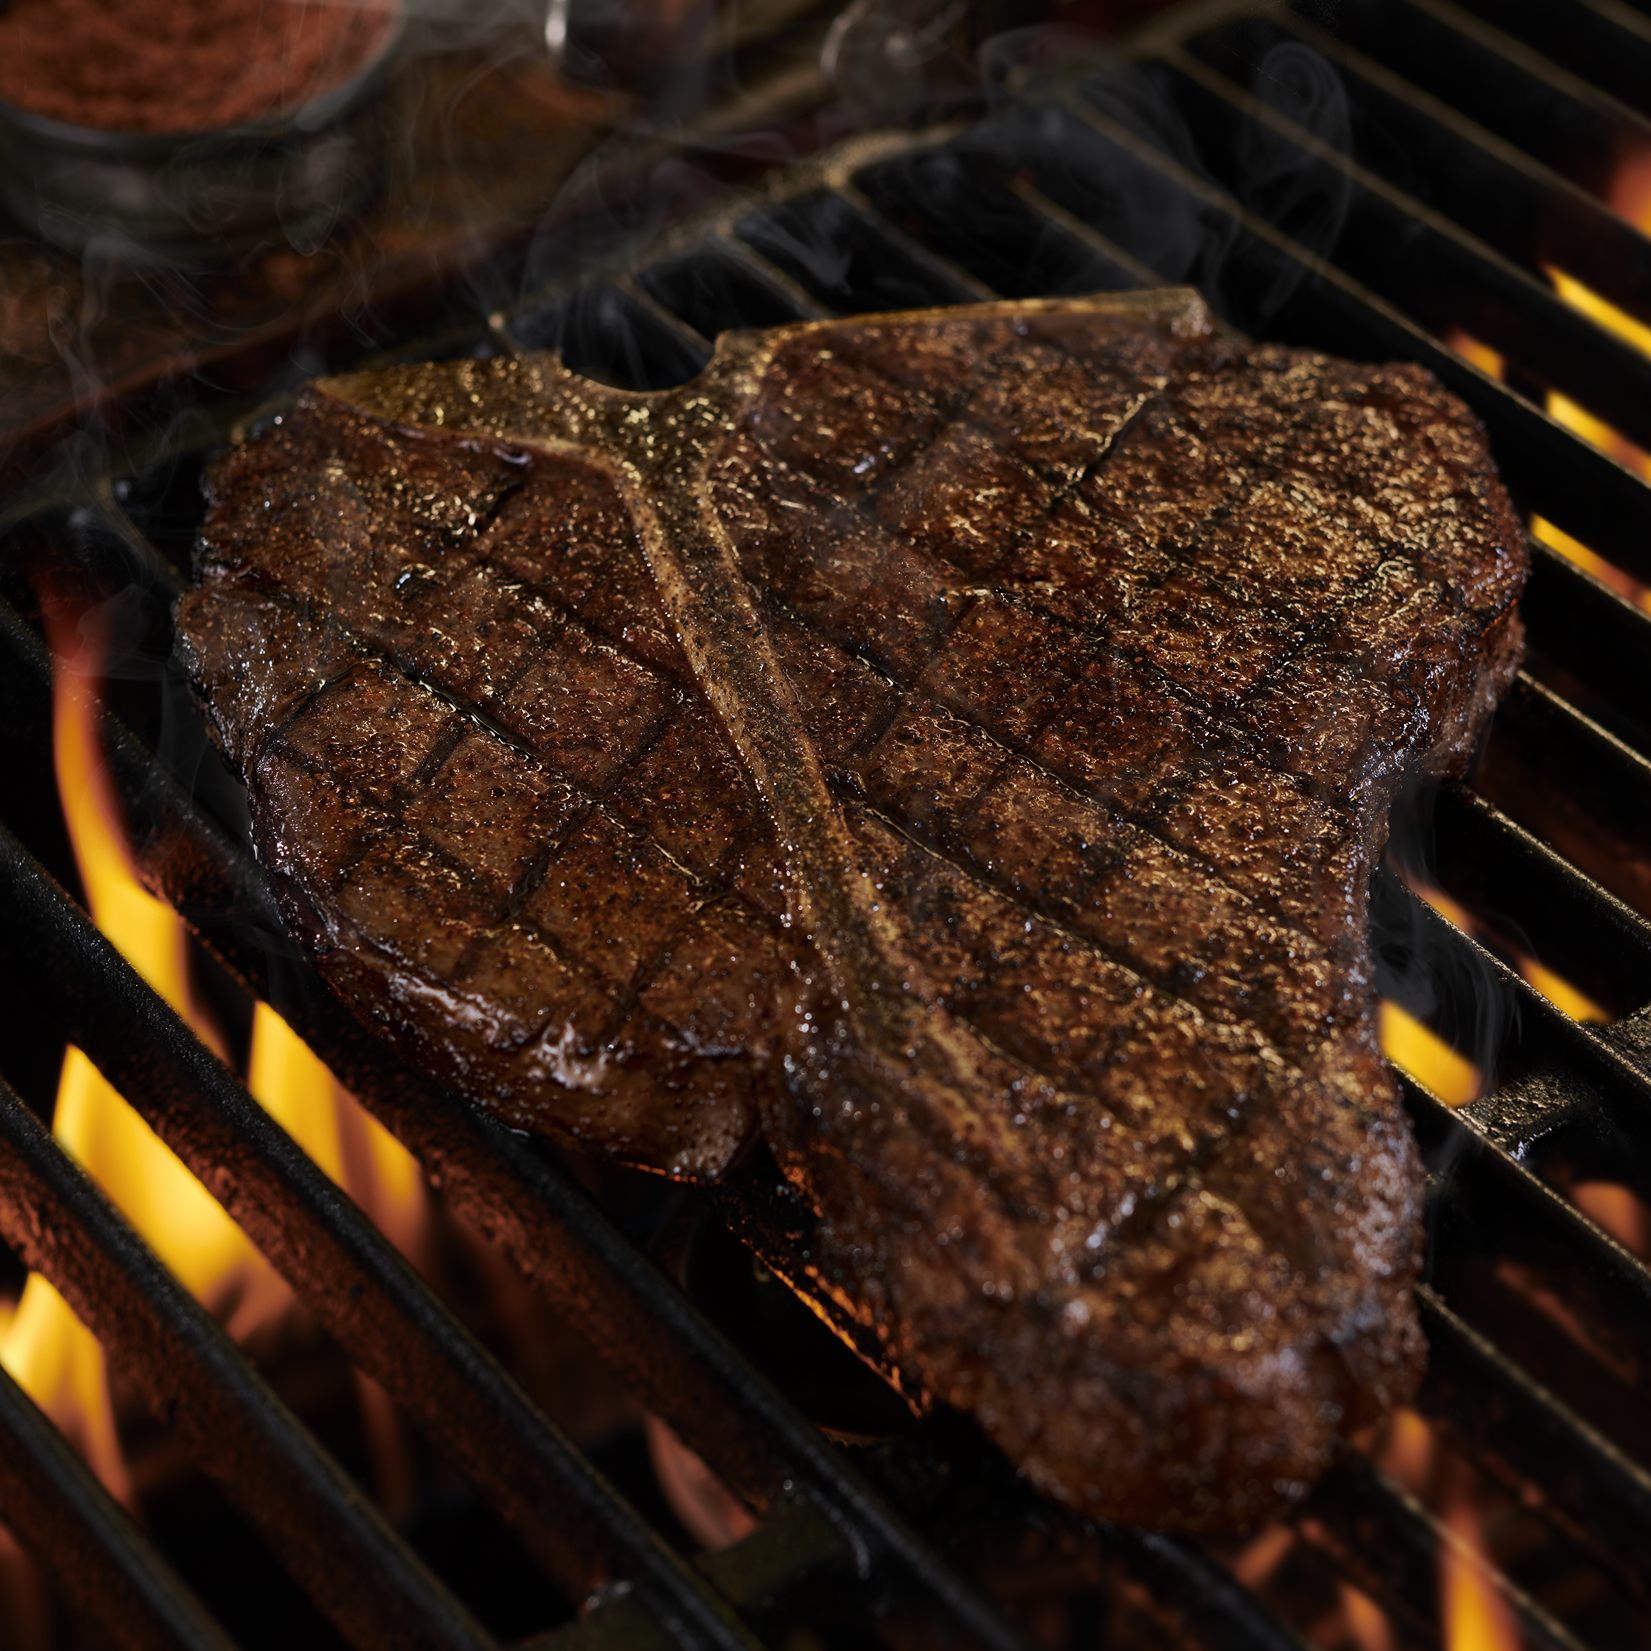 Got the biggest steak in the game wearing our name! The LongHorn porterhouse combines a bone-in stri LongHorn Steakhouse Midvale (801)566-3235